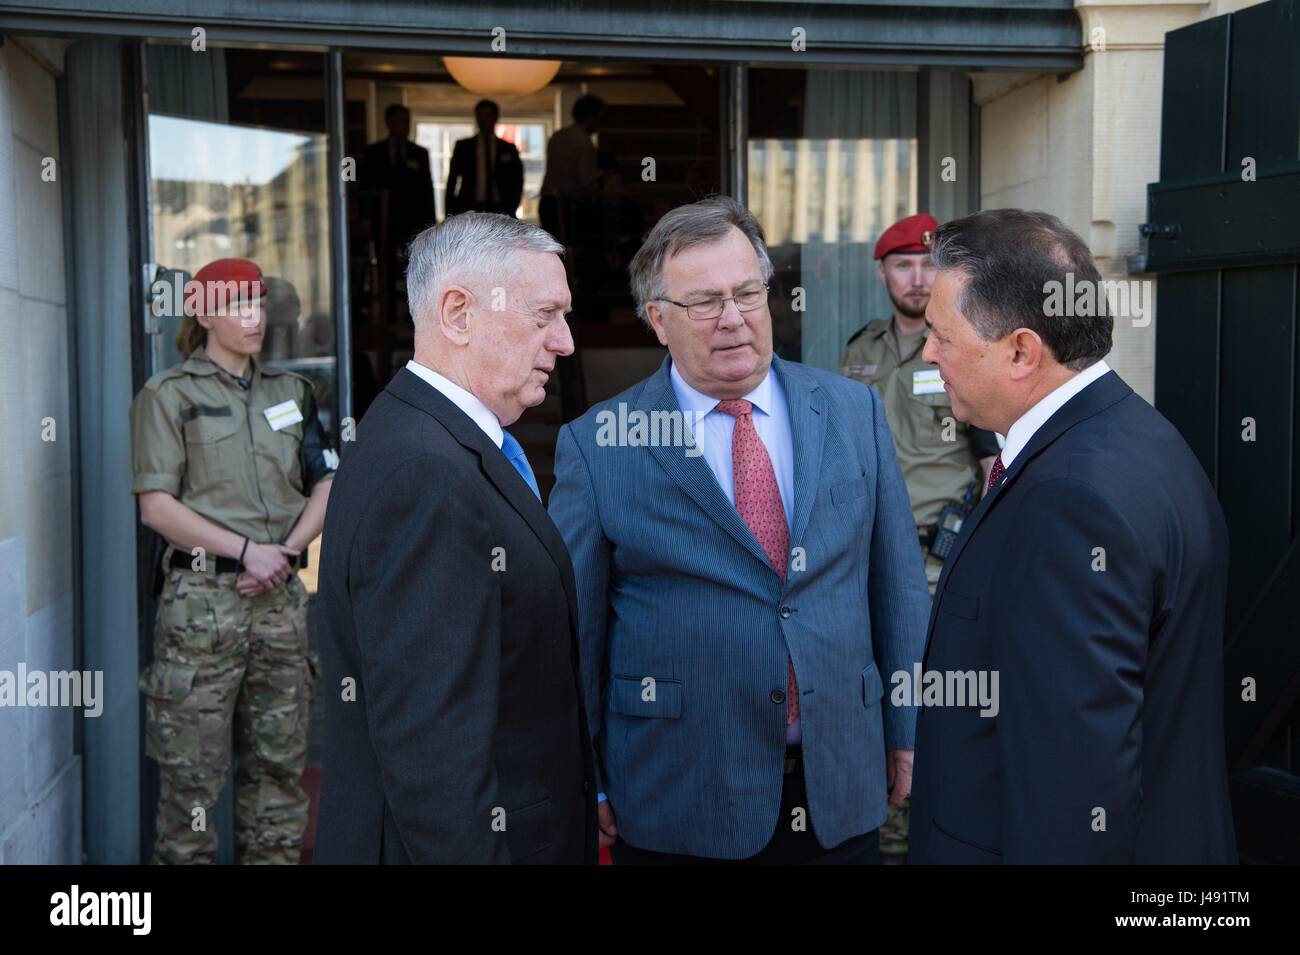 U.S. Secretary of Defense Jim Mattis, left, and Danish Minister of Defence Claus Hjort Frederiksen welcome Turkish Deputy Undersecretary of Defence Basat Öztürk for the Global Coalition on the Defeat of ISIS meeting at Eigtveds Pakhus May 9, 2017 in Copenhagen, Denmark. The meeting comes on the heals of President Donald Trump announcing that the U.S. will arm Kurdish rebels fighting in Syria. Stock Photo